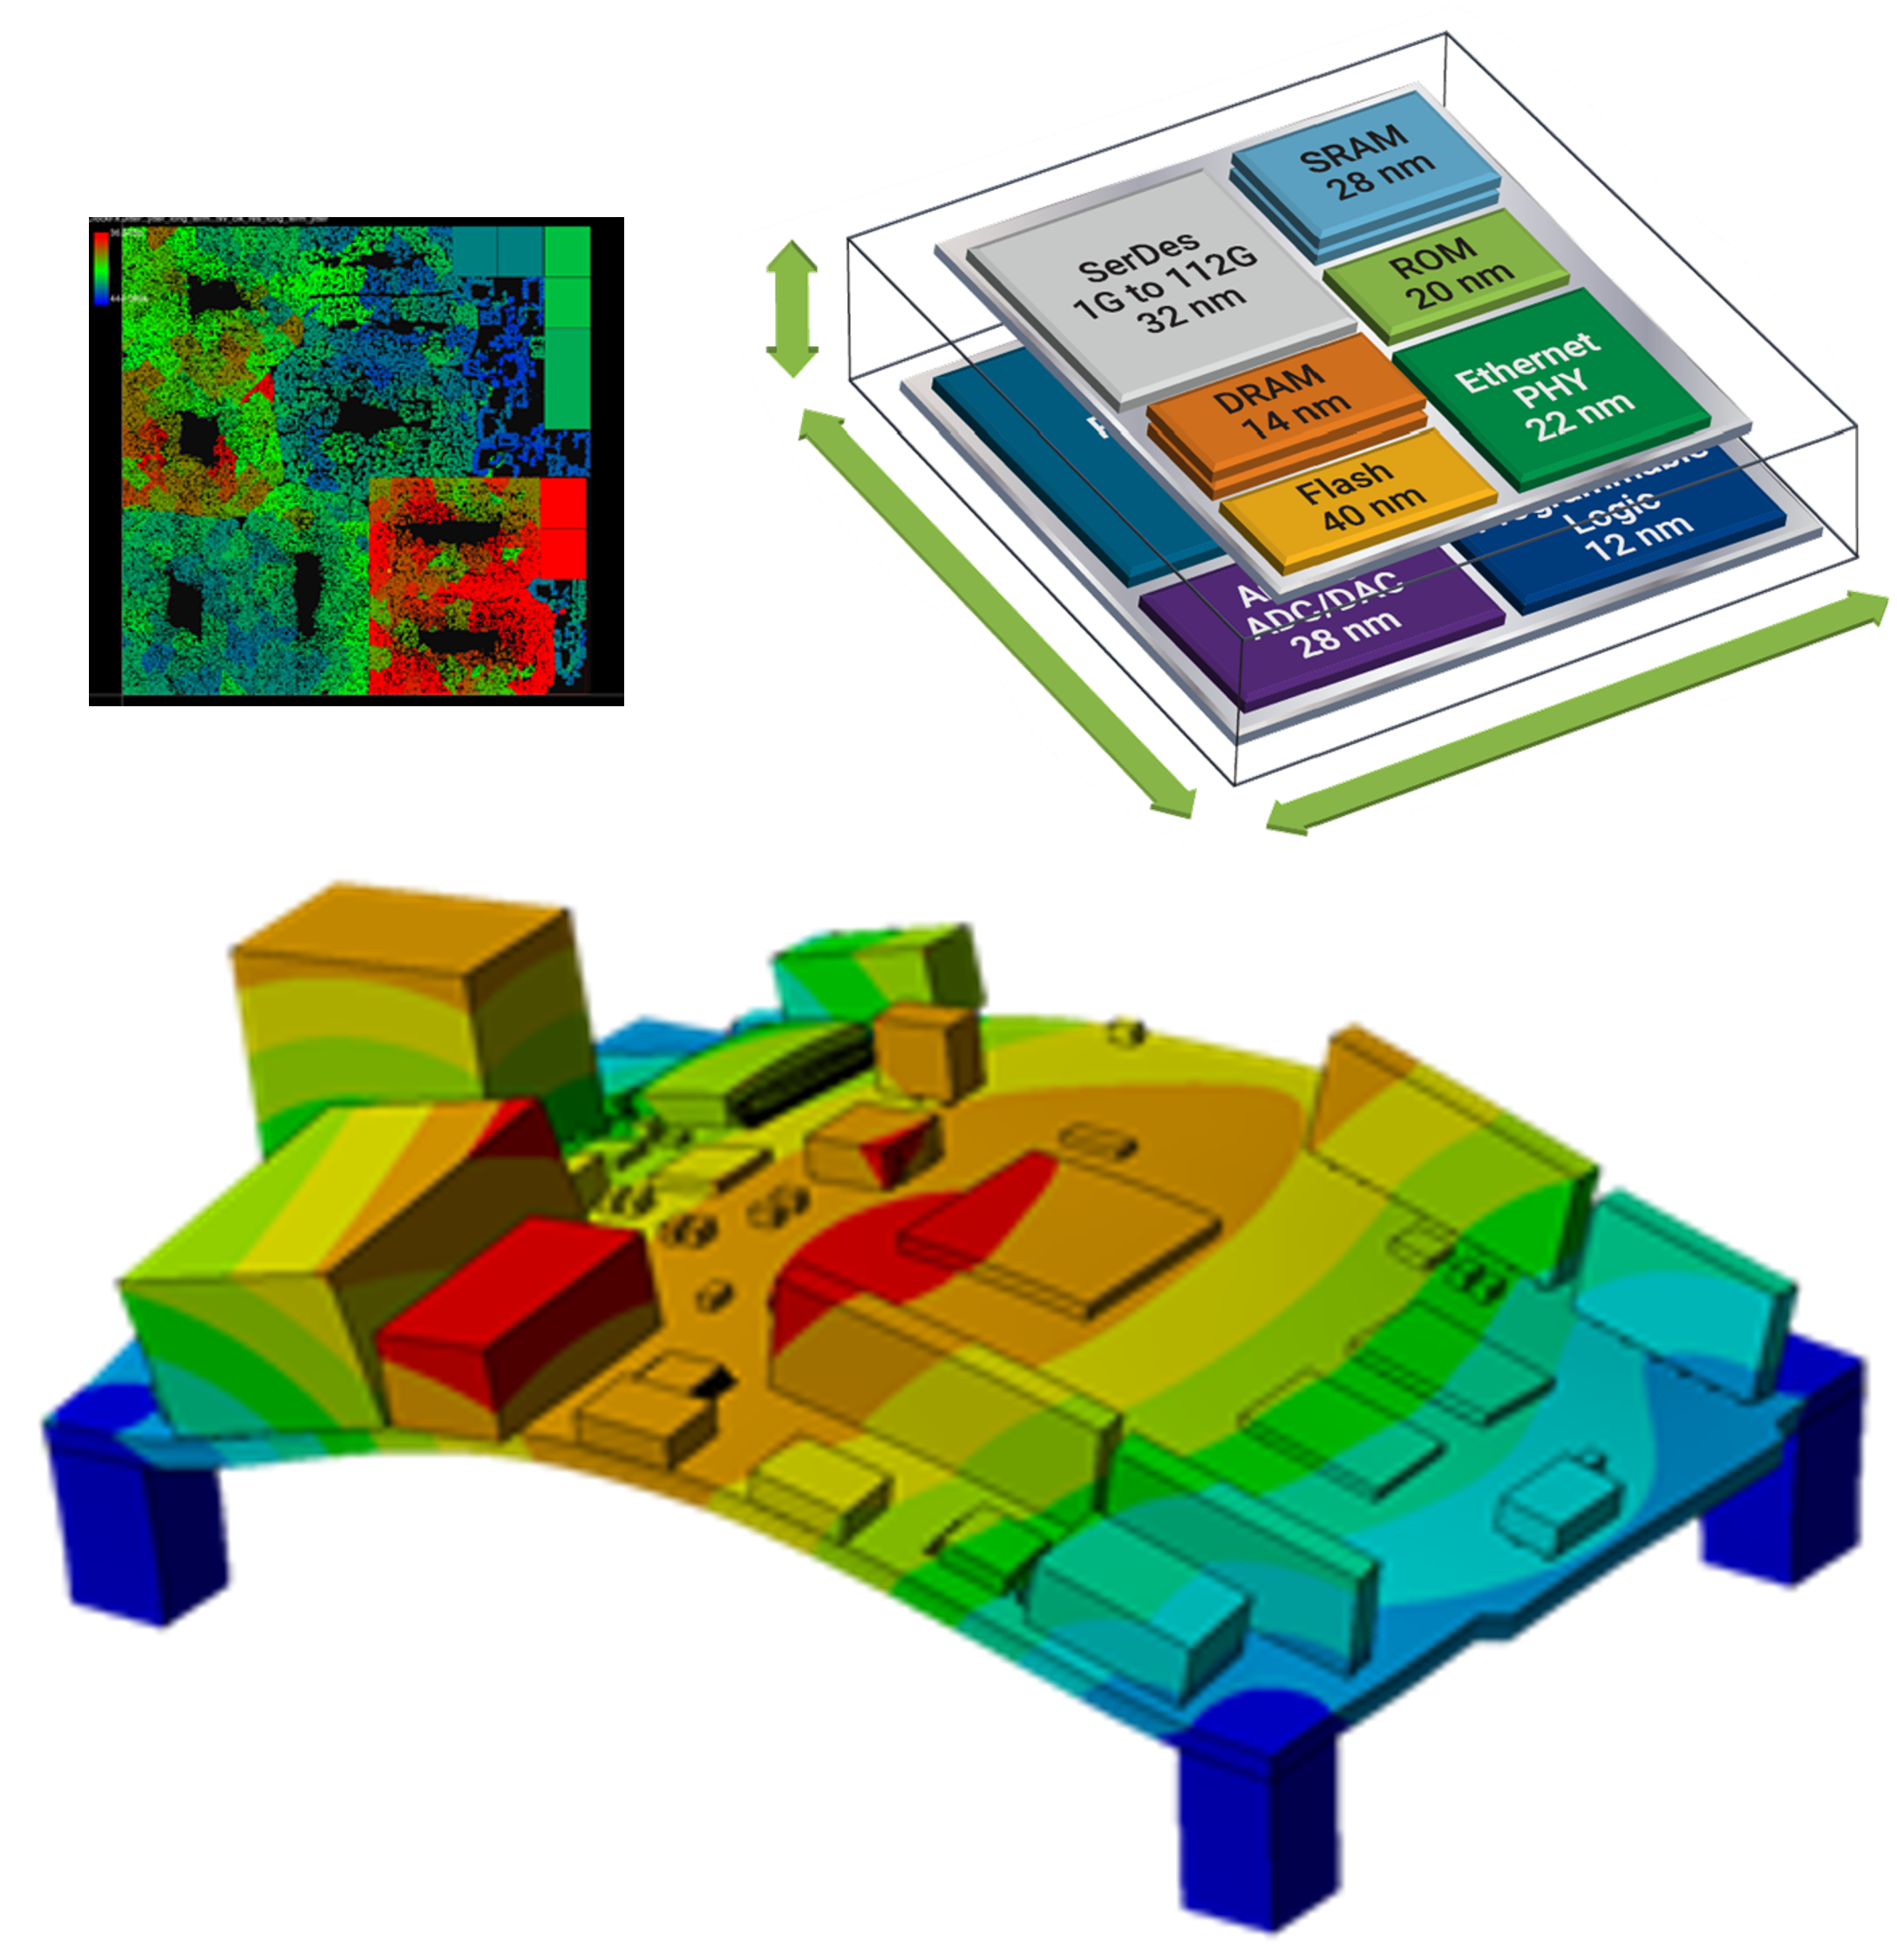 Ansys chip-package-board